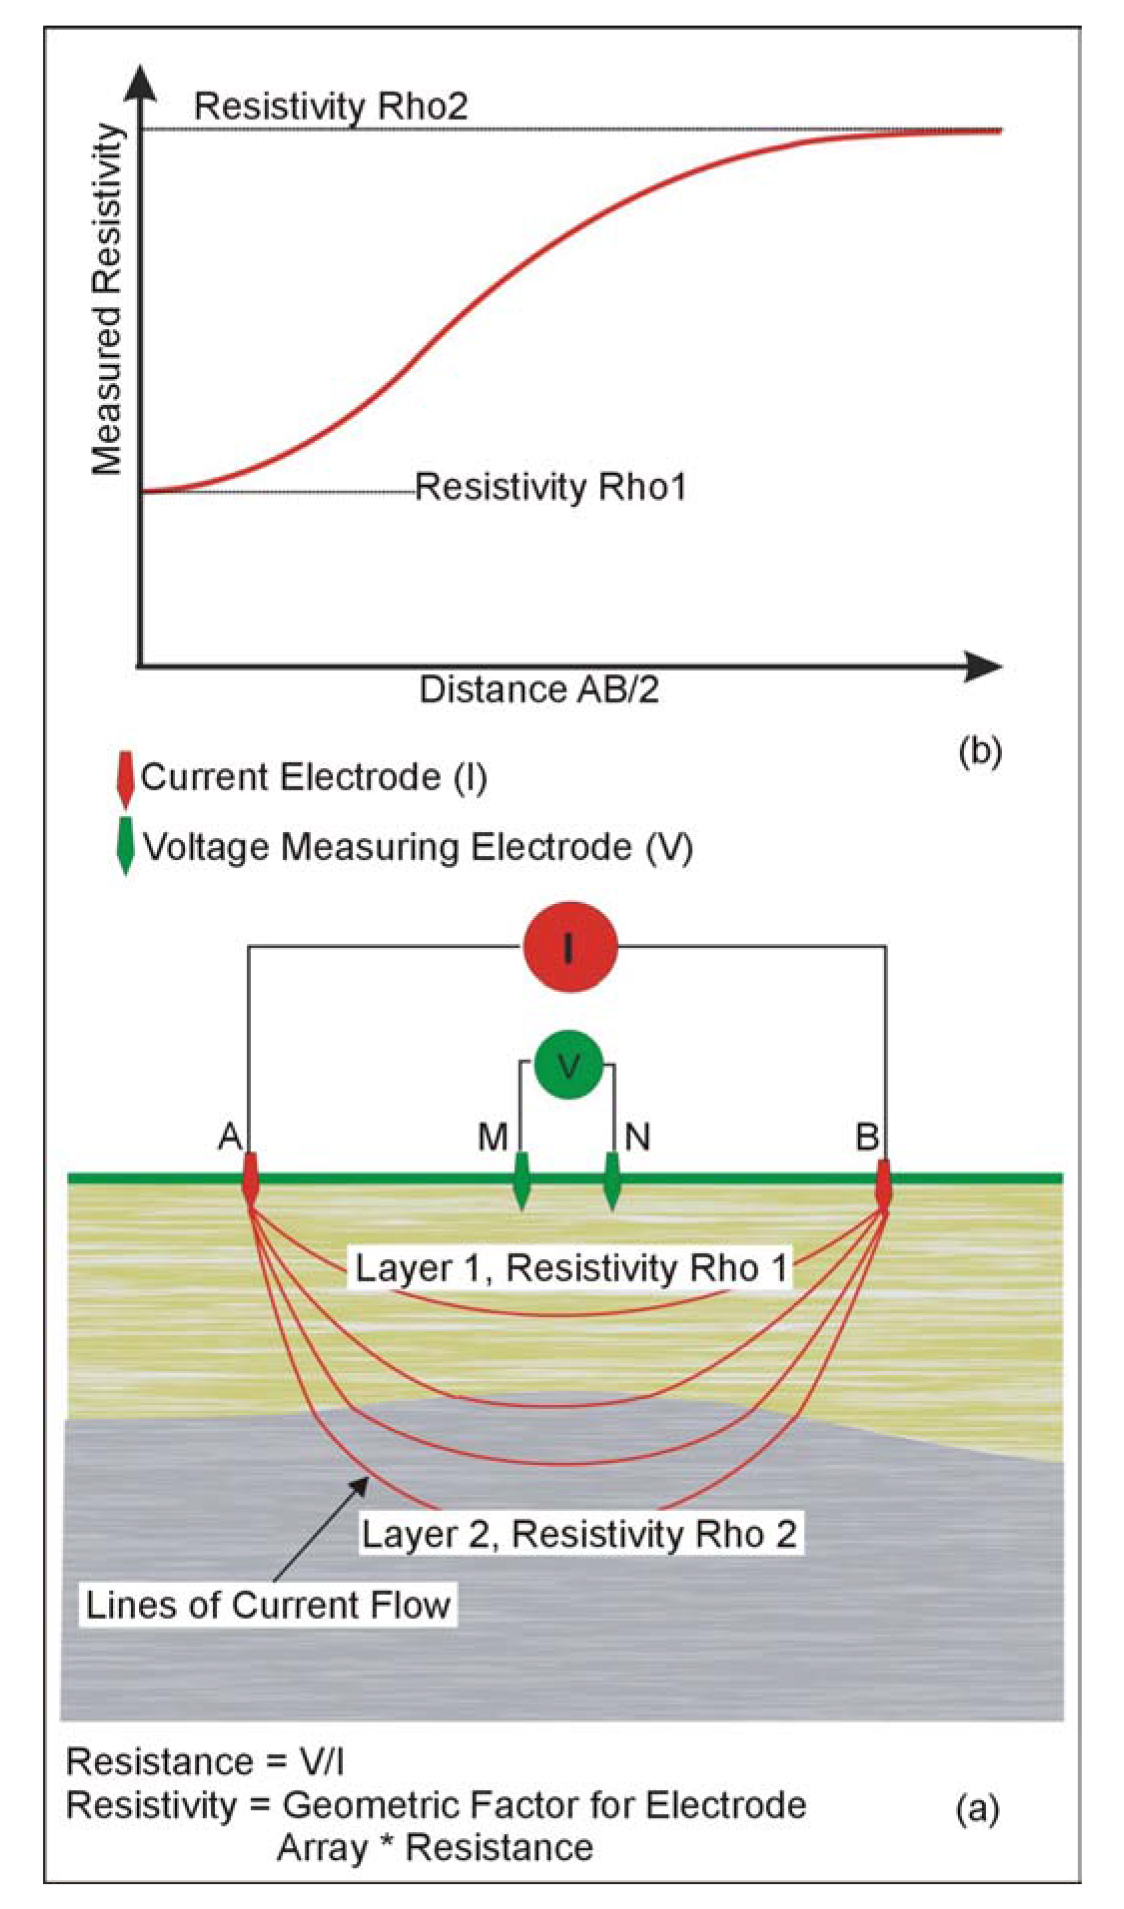 Electrode array for (a) measuring the resisivity of the ground, and (b) a resisitivity sounding curve.